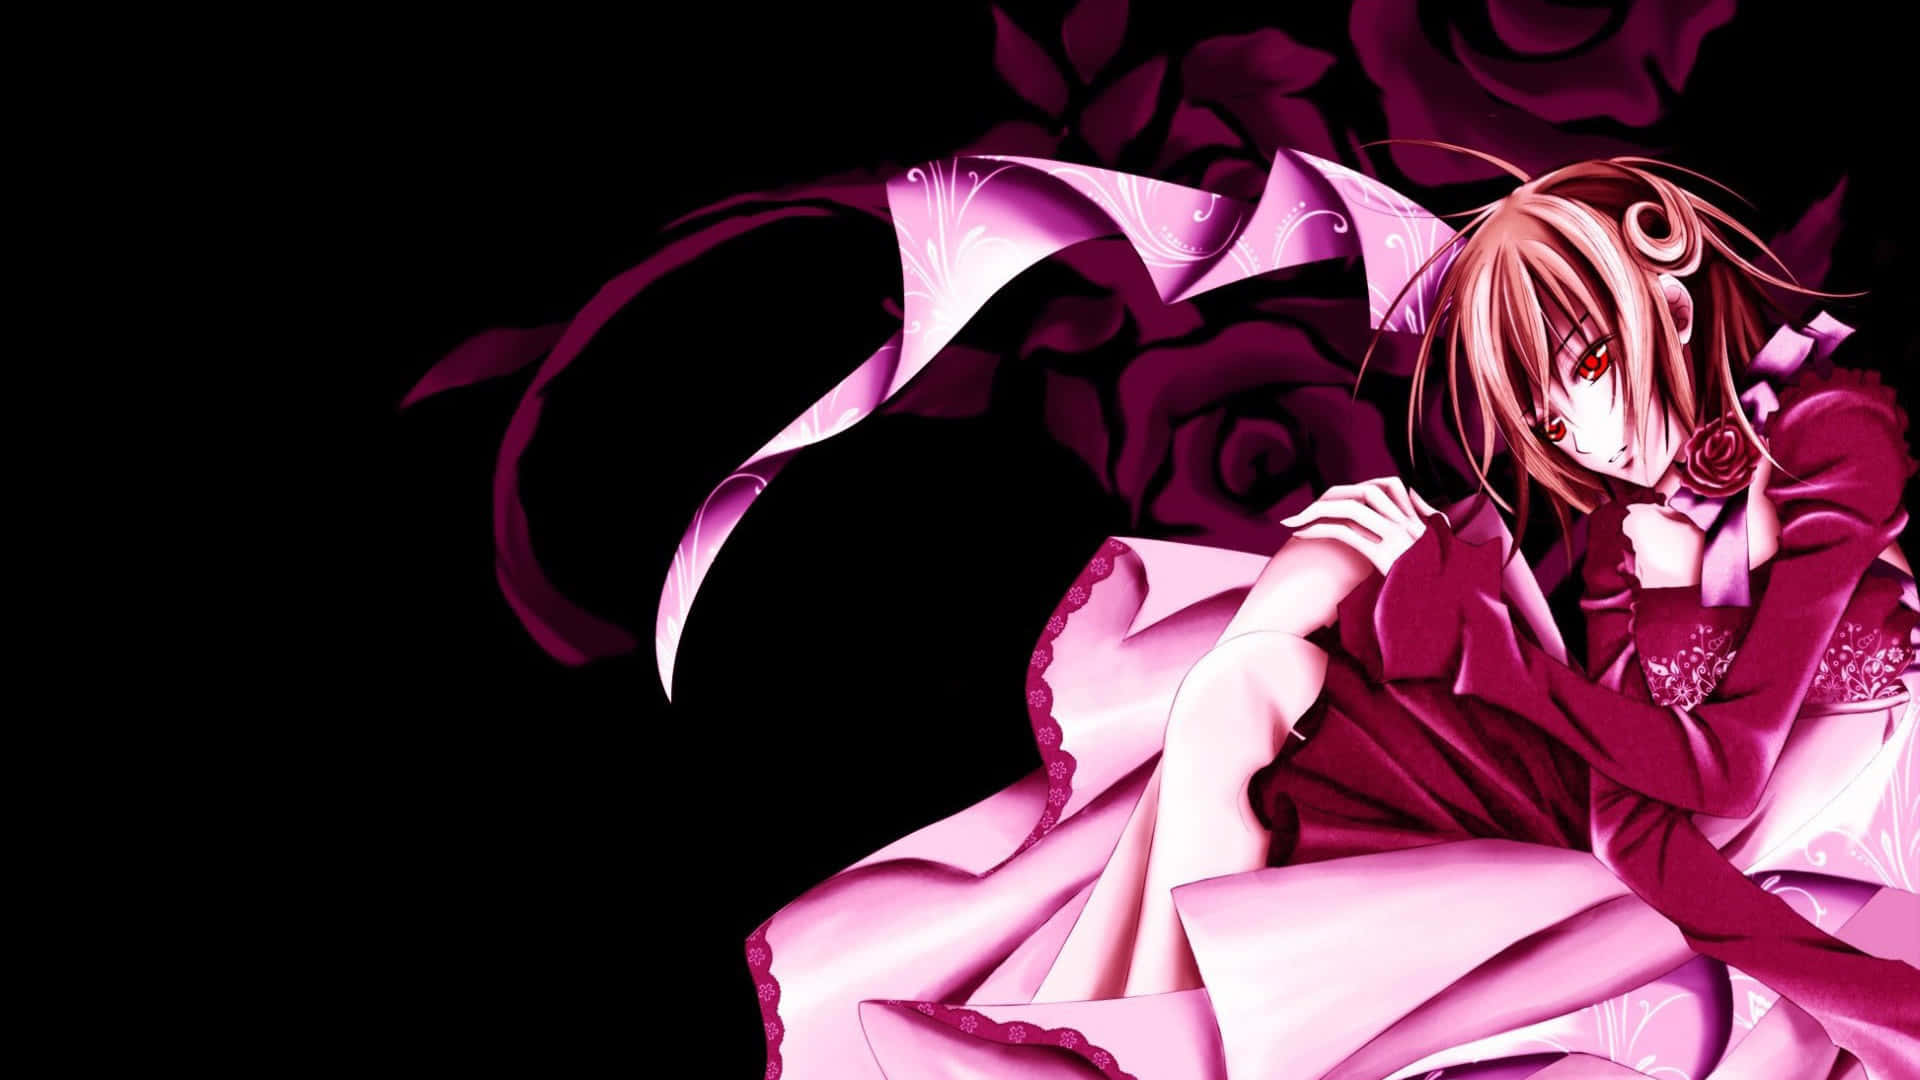 Anime Girl In Pink Dress Sitting On A Black Background Wallpaper